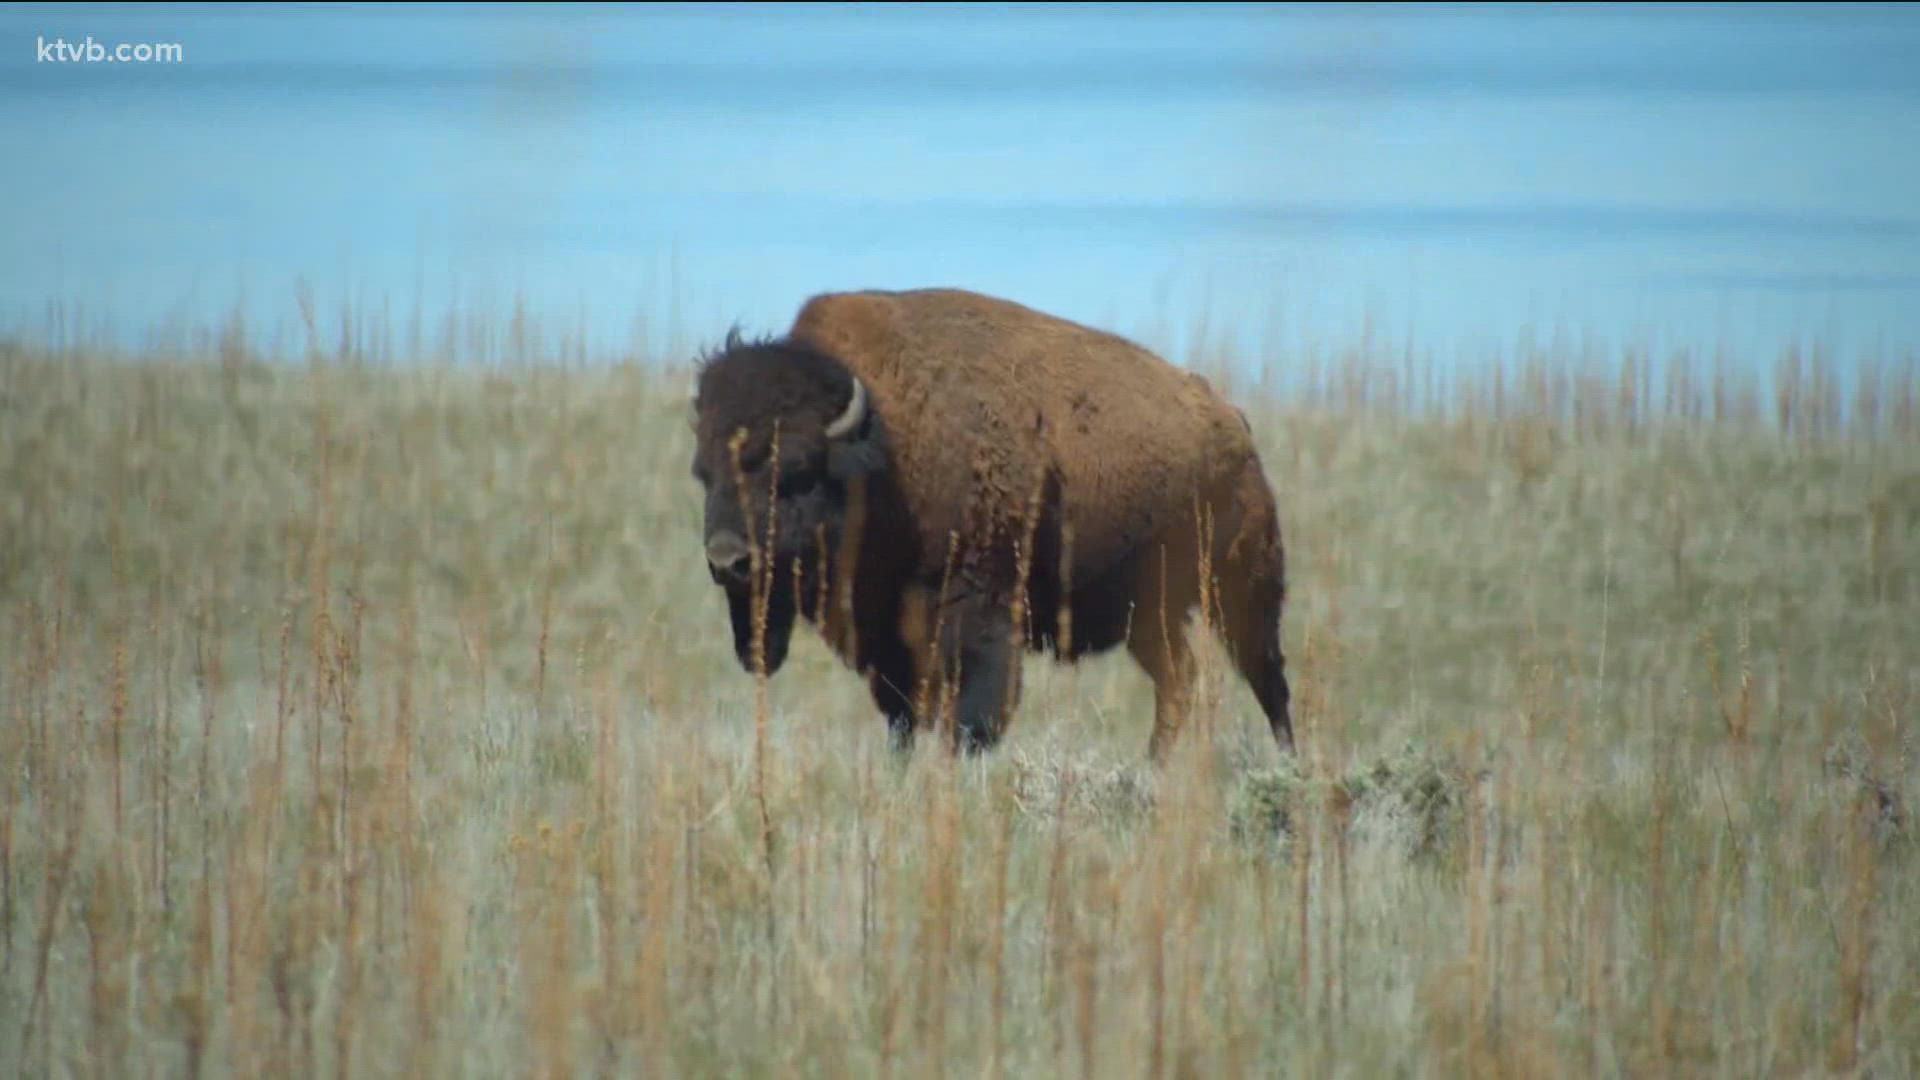 A woman was hospitalized after she was gored and launched 10 feet into the air by a bison in Yellowstone National Park.